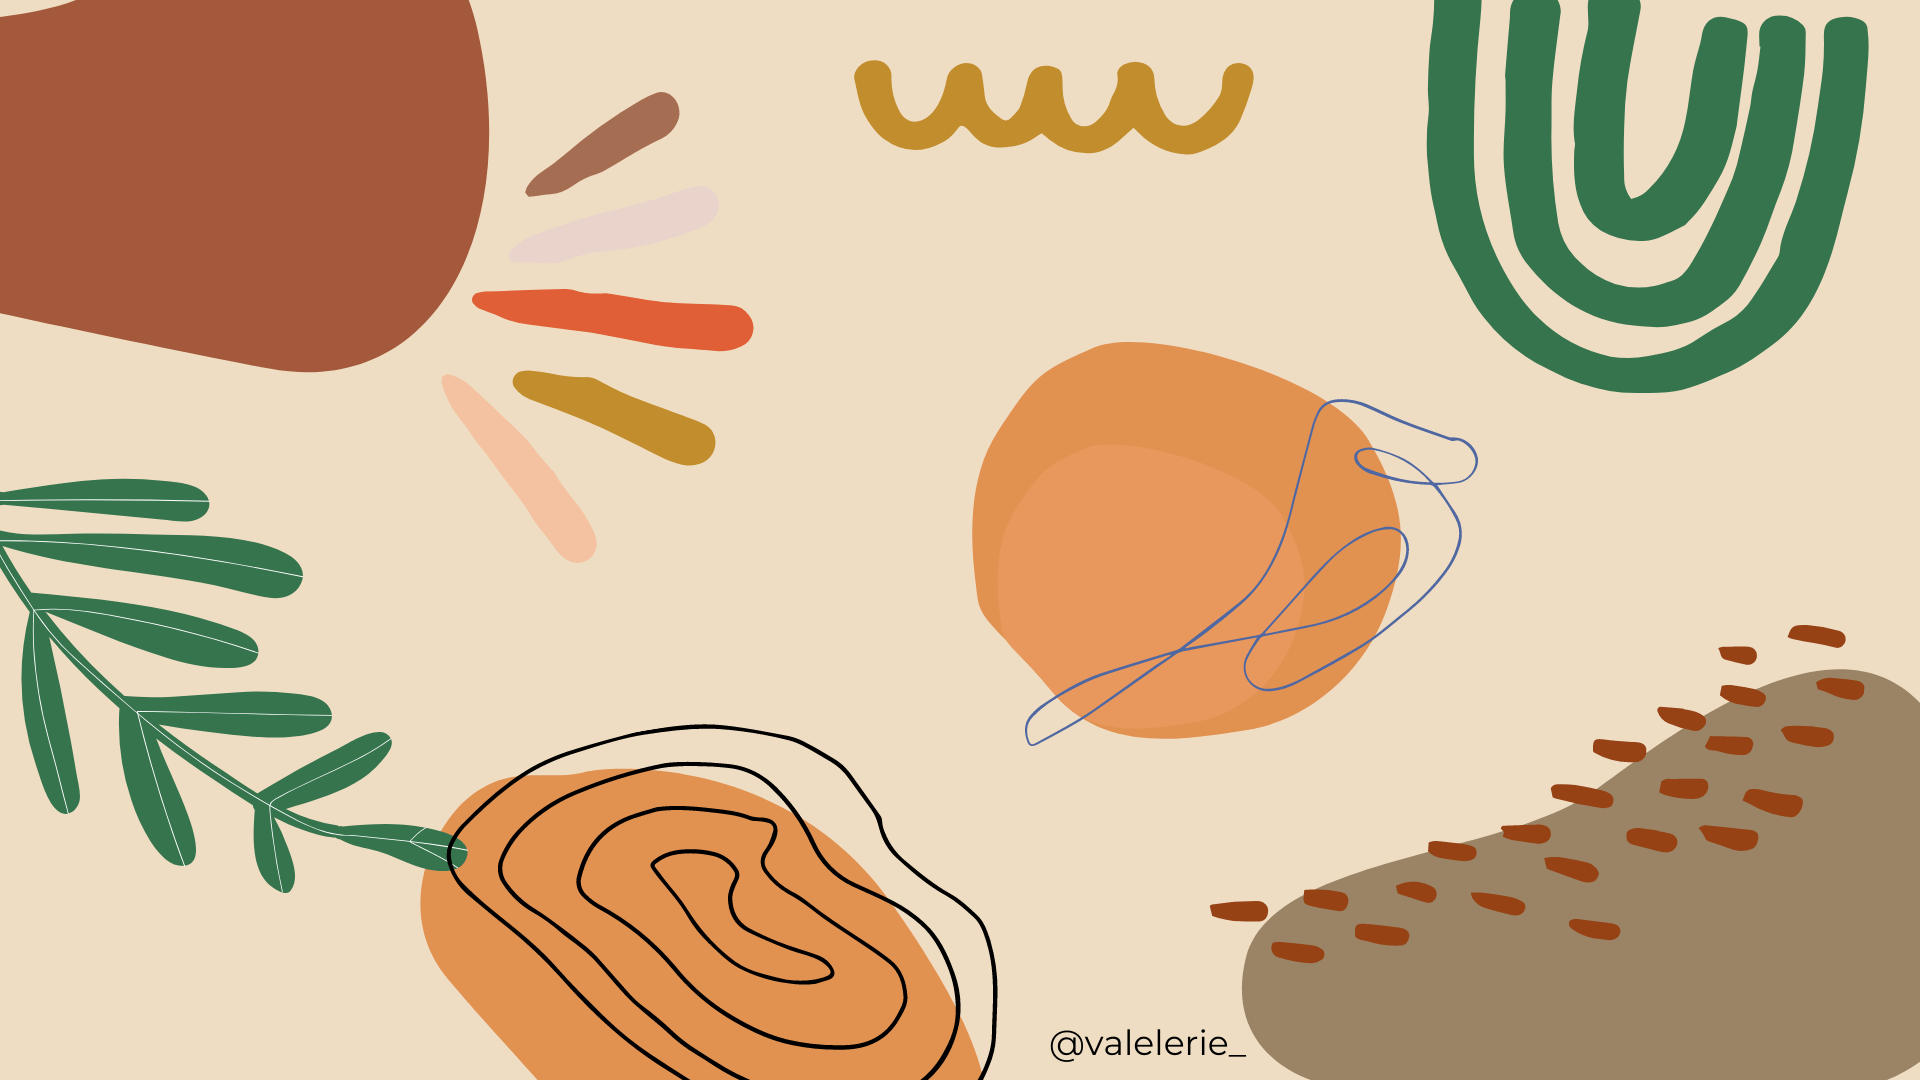 A poster with various objects and plants - Abstract